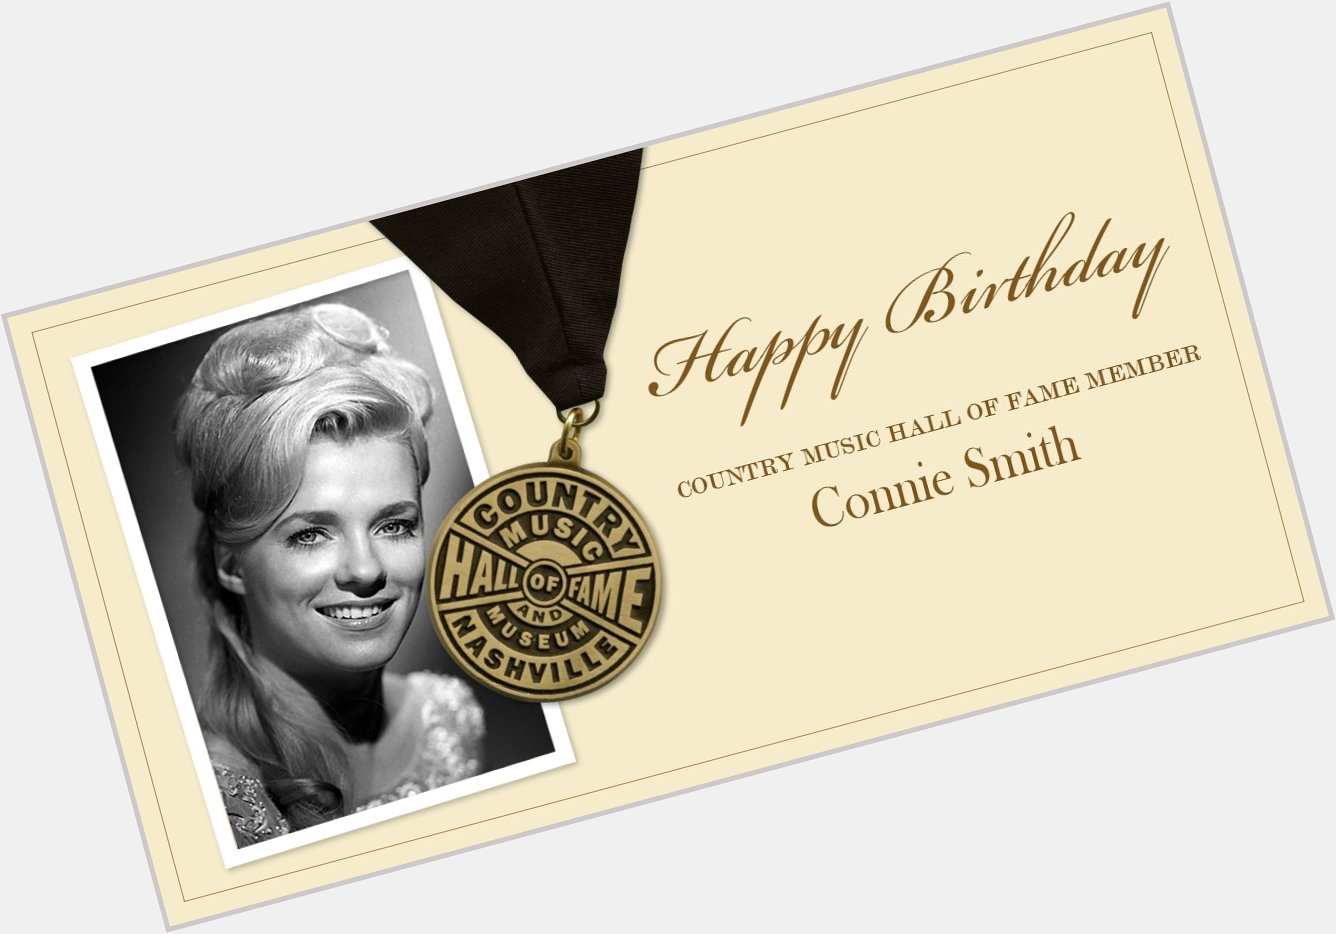 Help us wish a very happy birthday to Country Music Hall of Fame member Connie Smith! 